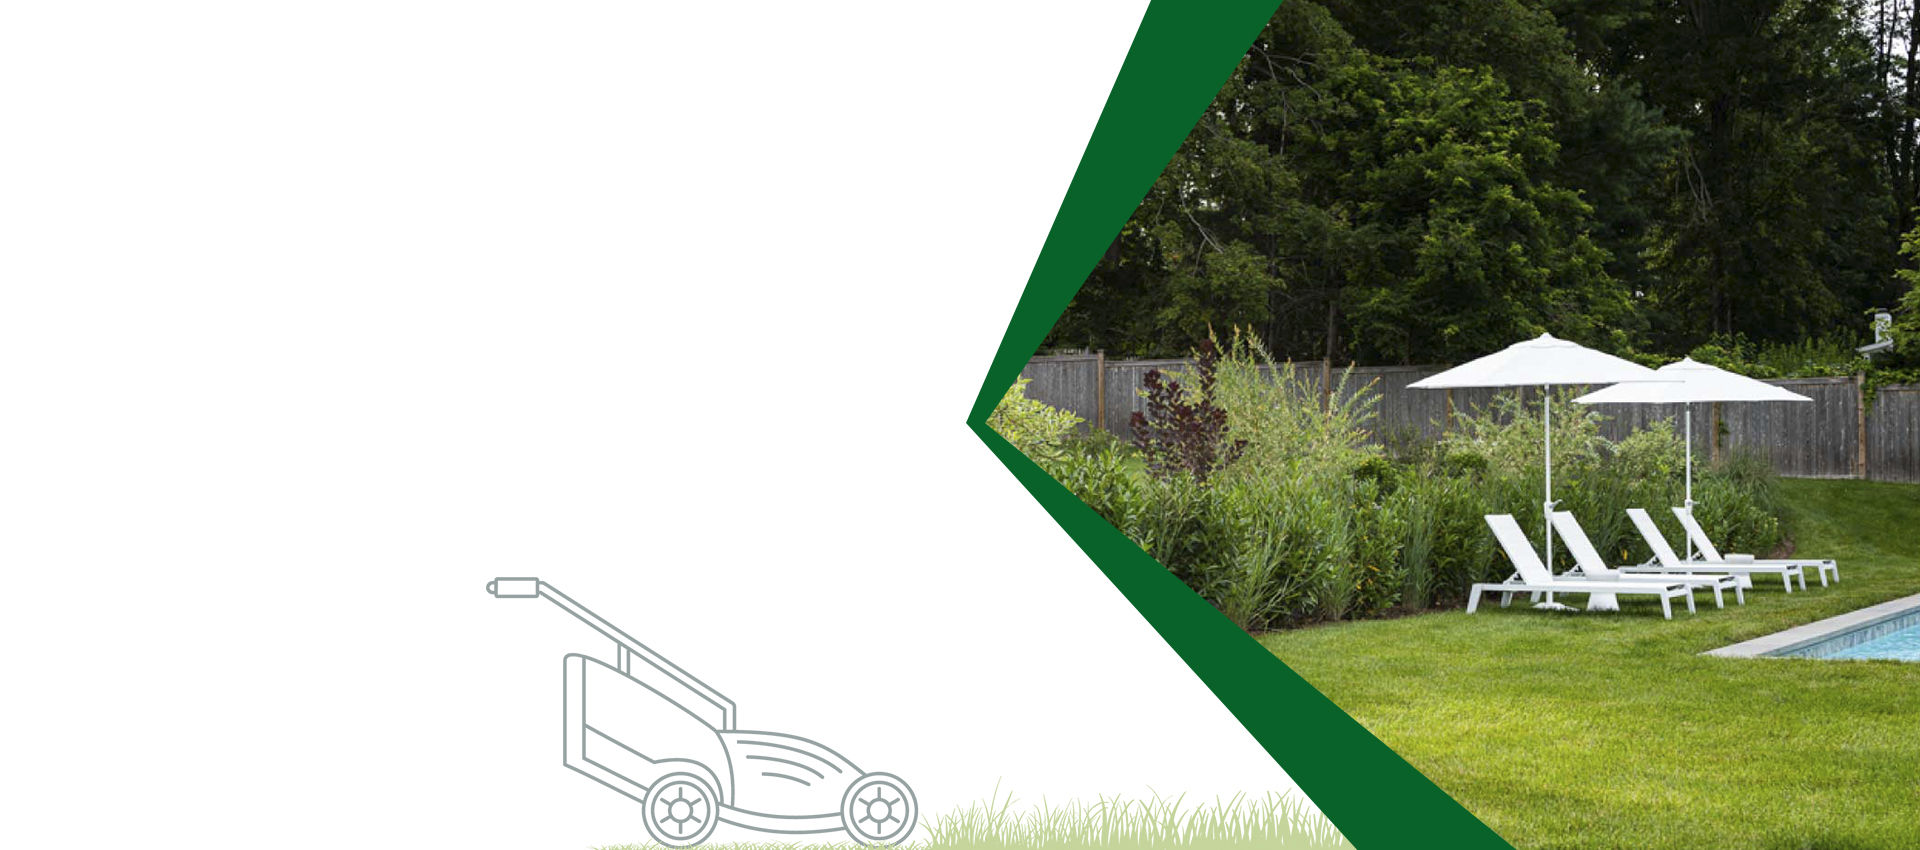 Landscaping and Gardening Services in London